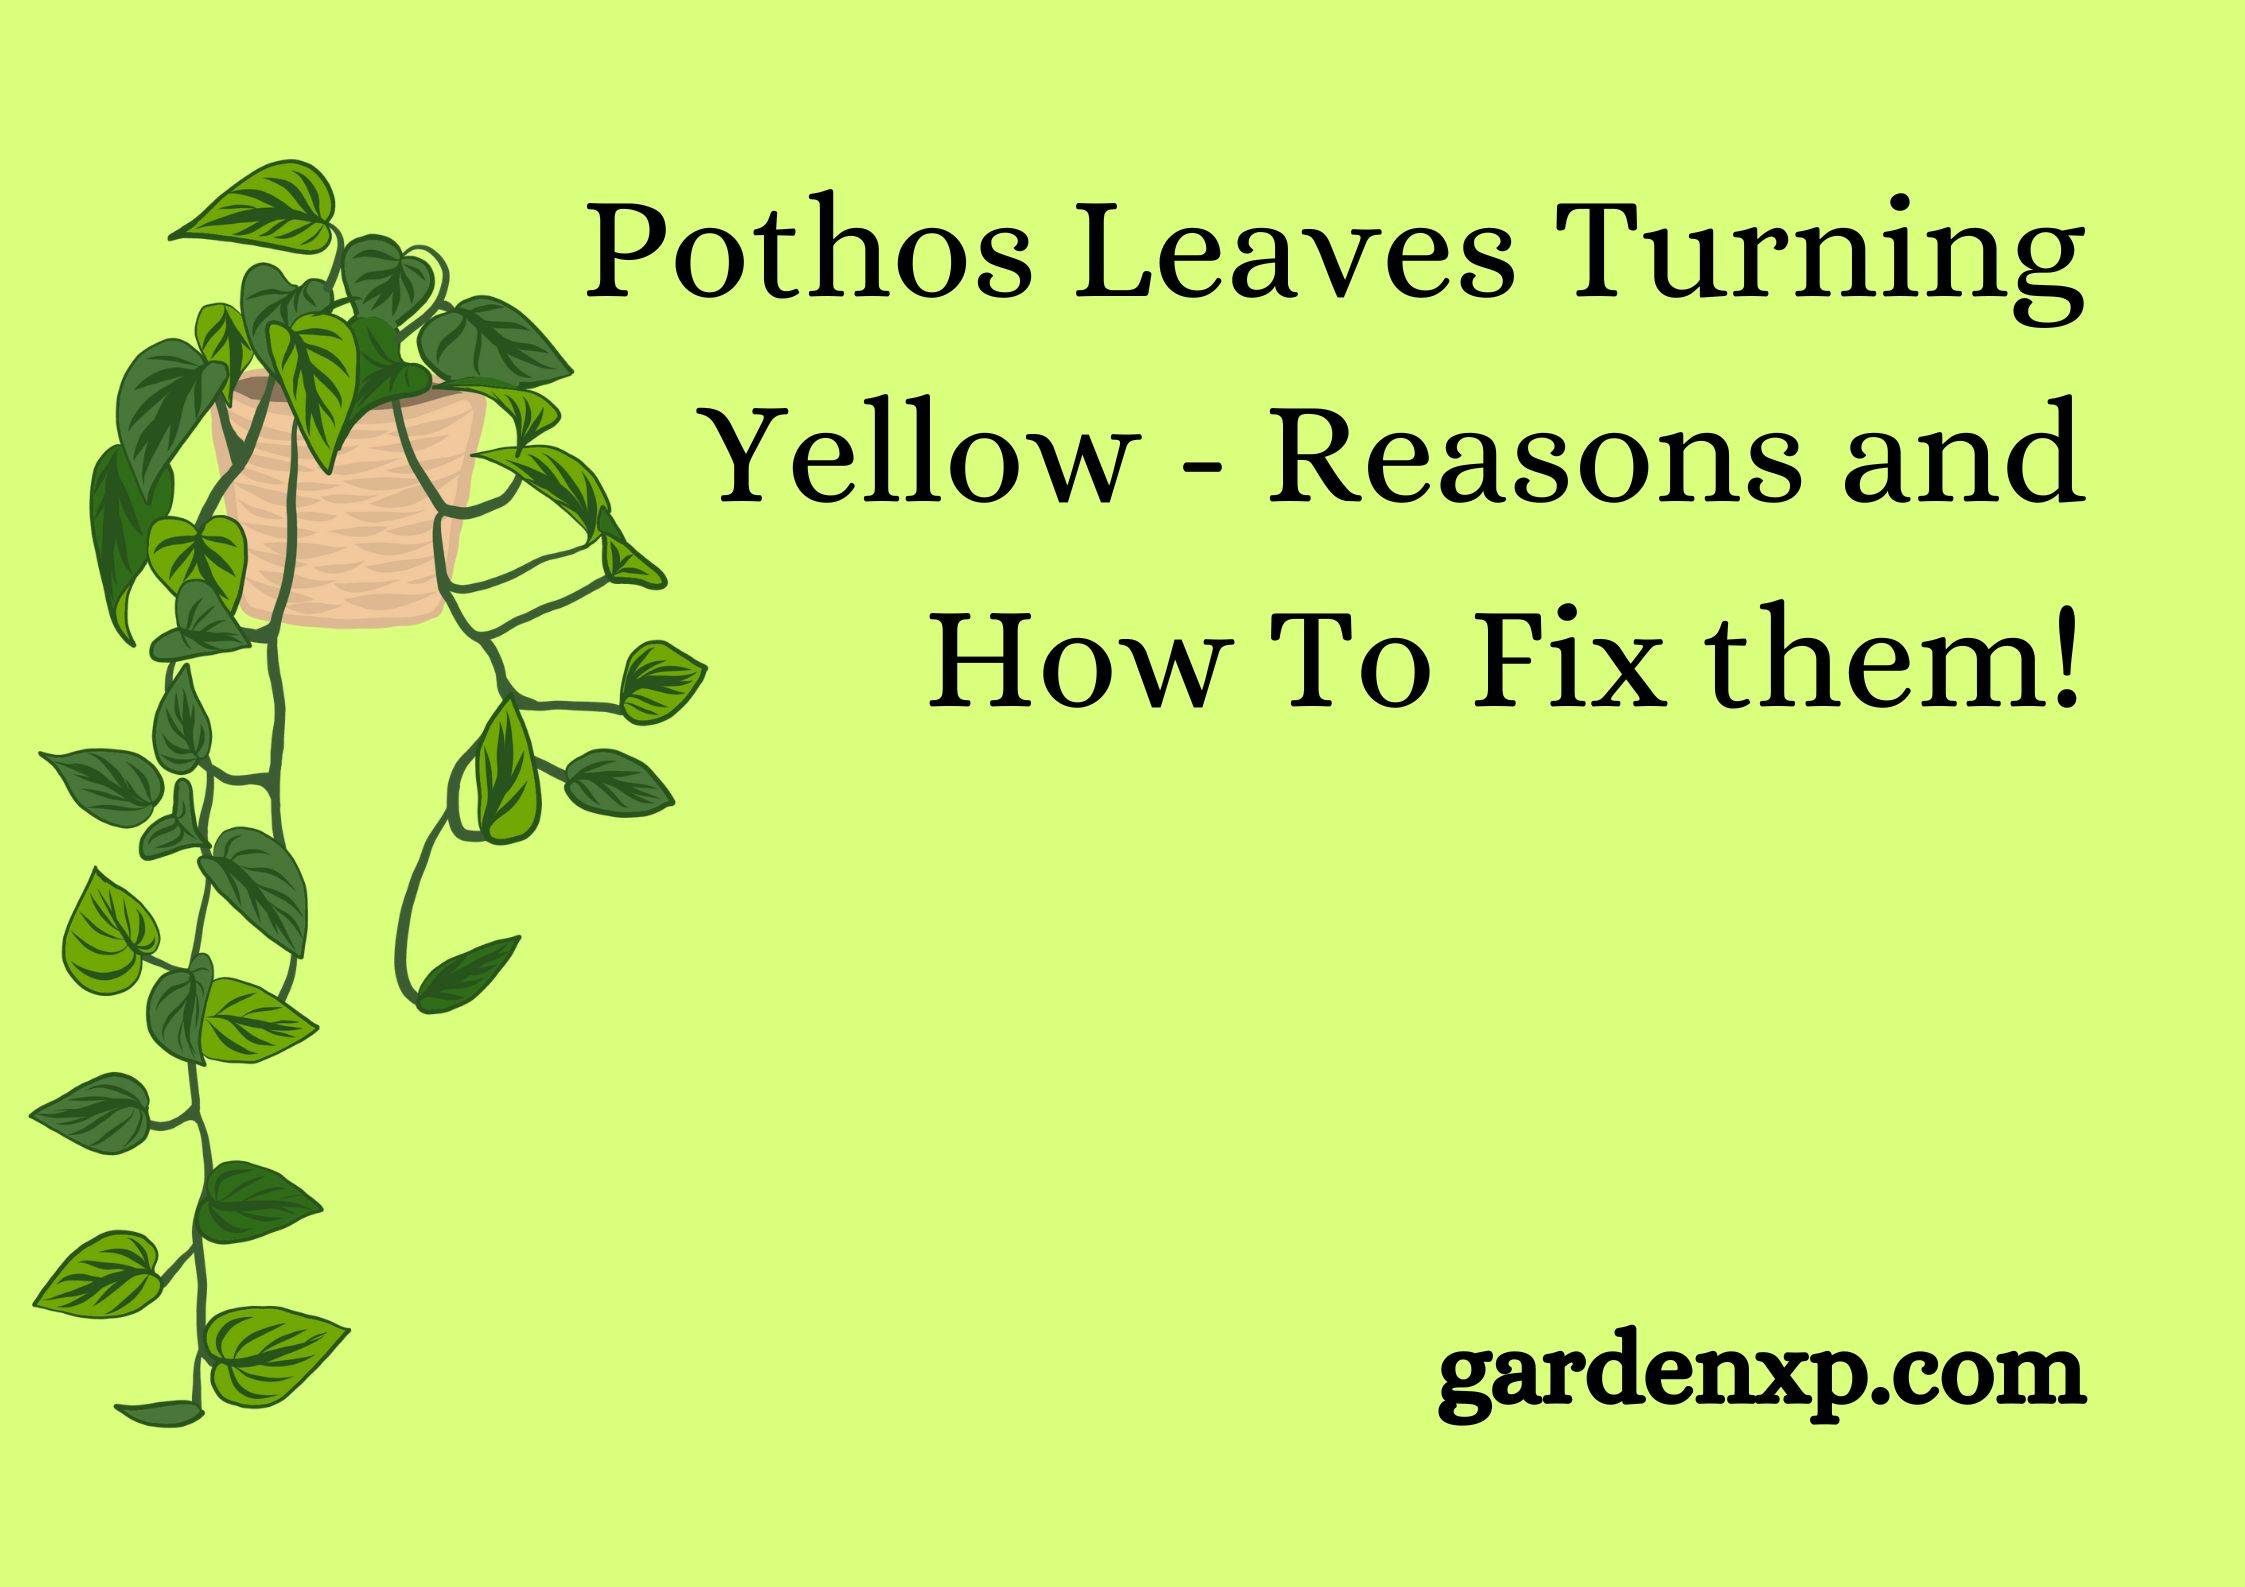 Pothos Leaves Turning Yellow - Reasons and How To Fix them!